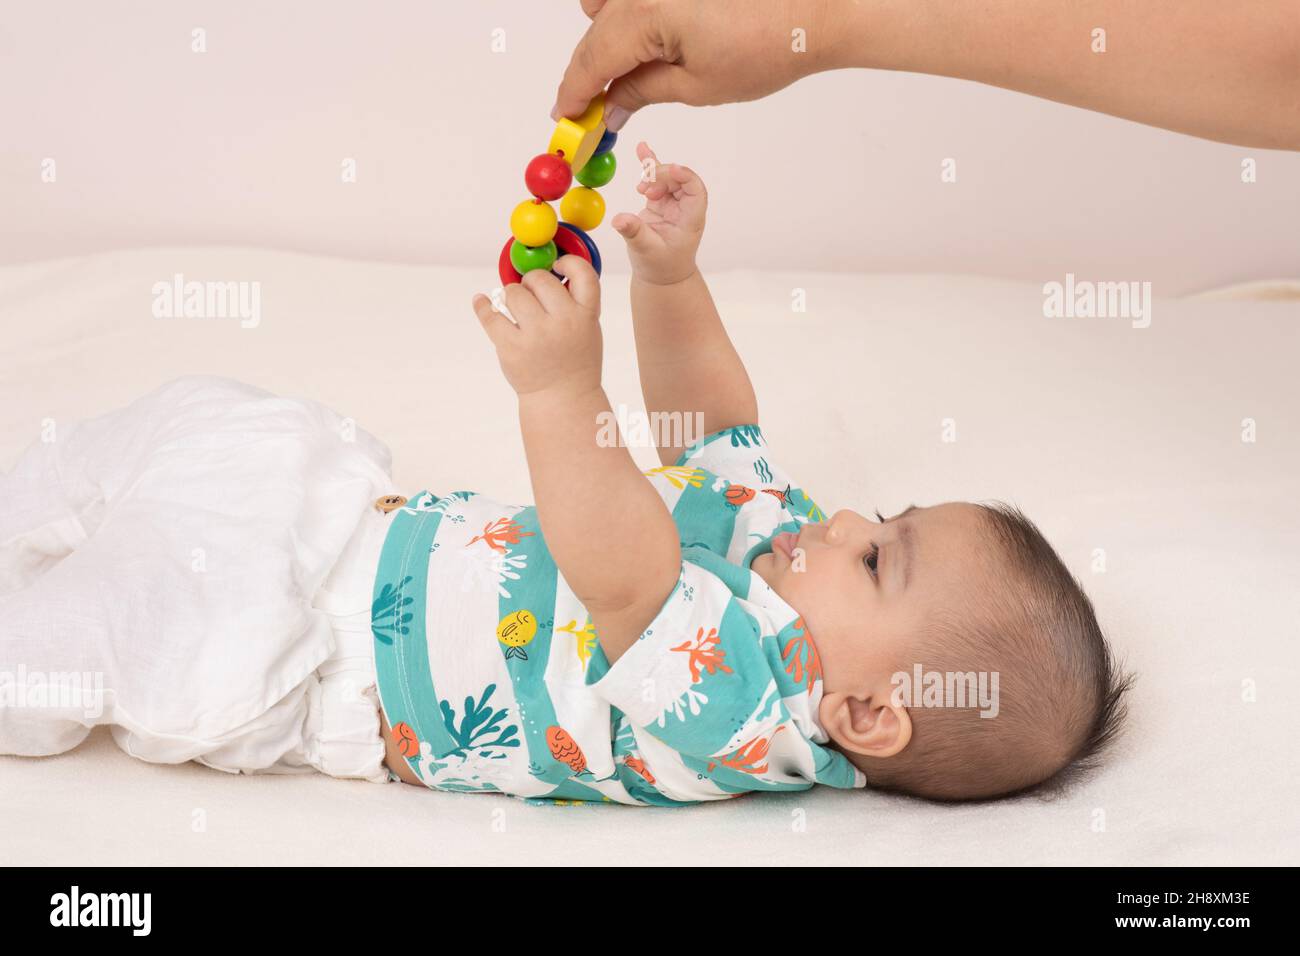 3 month old baby boy on back reaching for toy adult is holding dangling above him Stock Photo